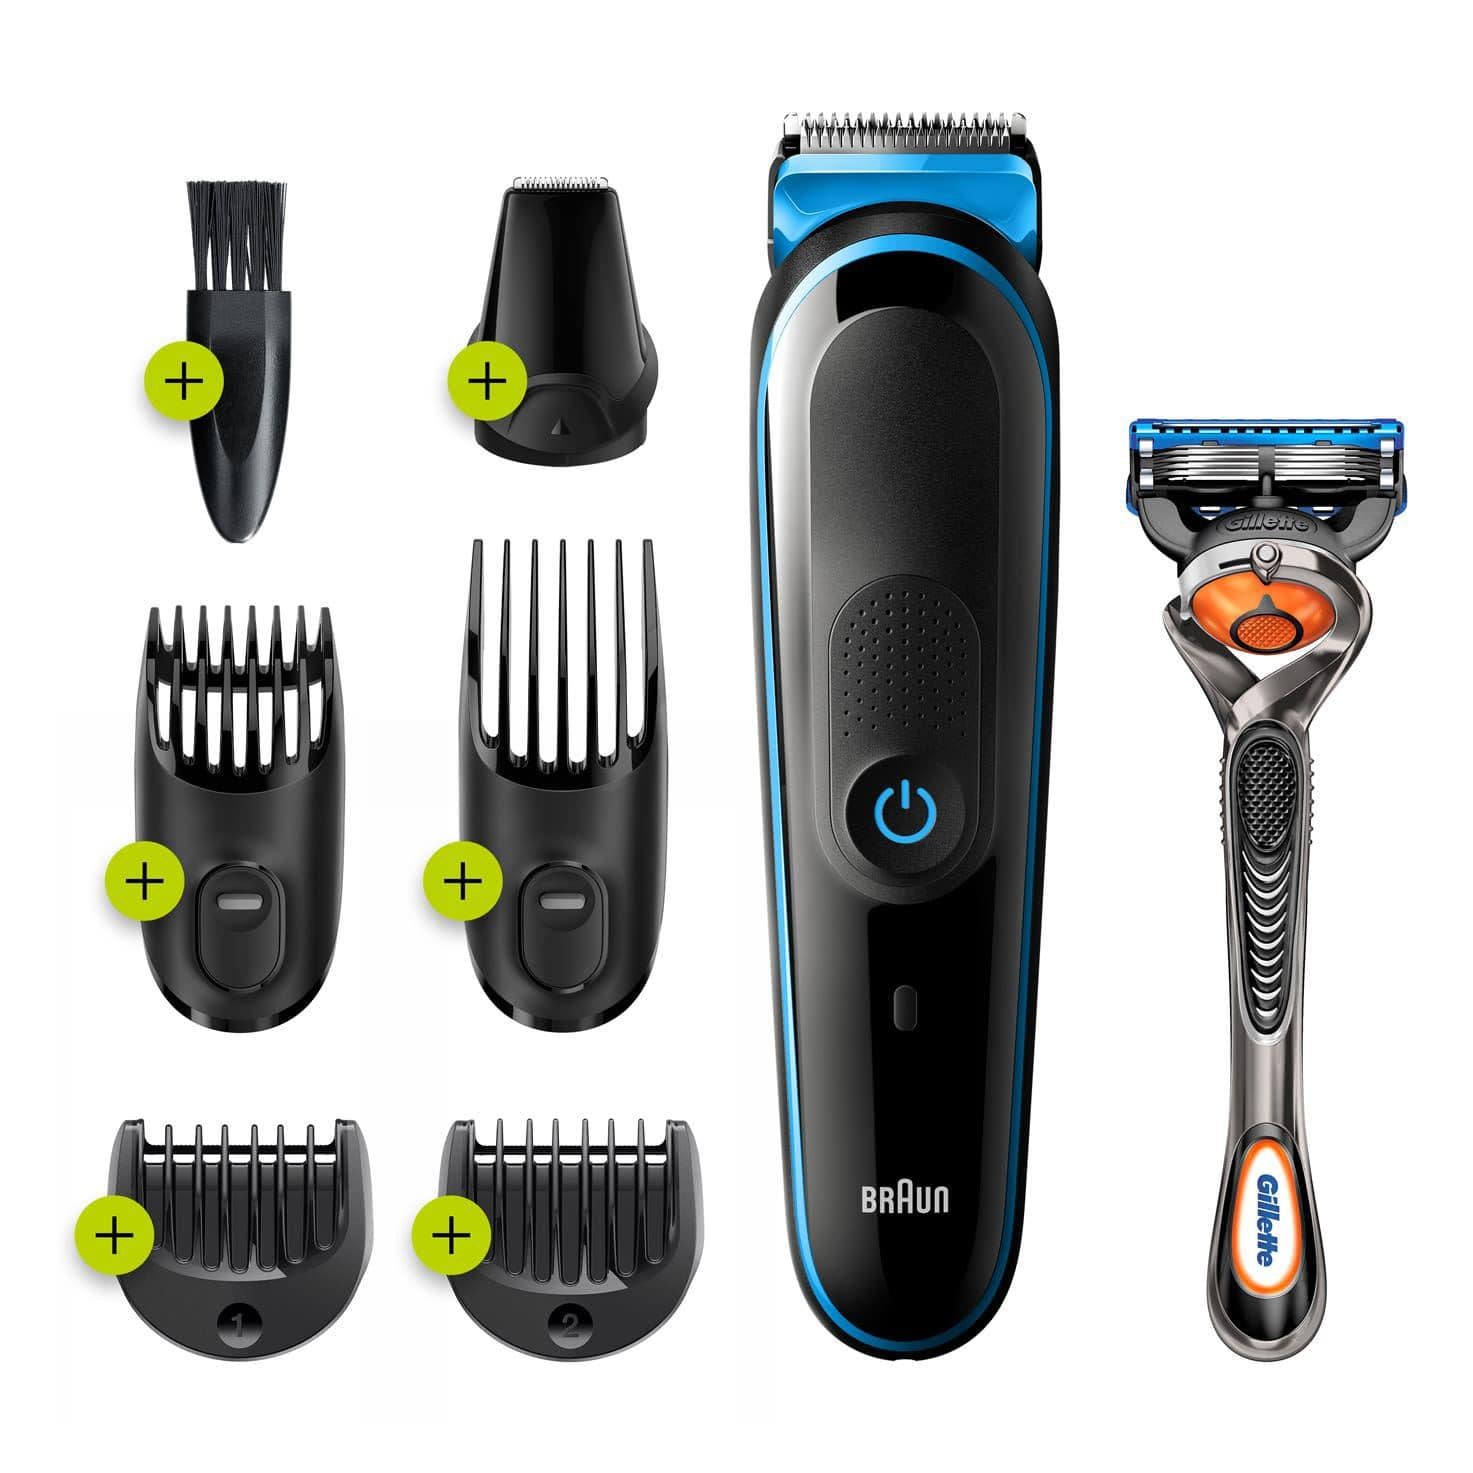 Braun Men's MGK3245 All-In-One Trimmer Styling Kit - 5 Attachments, Waterproof - Healthxpress.ie